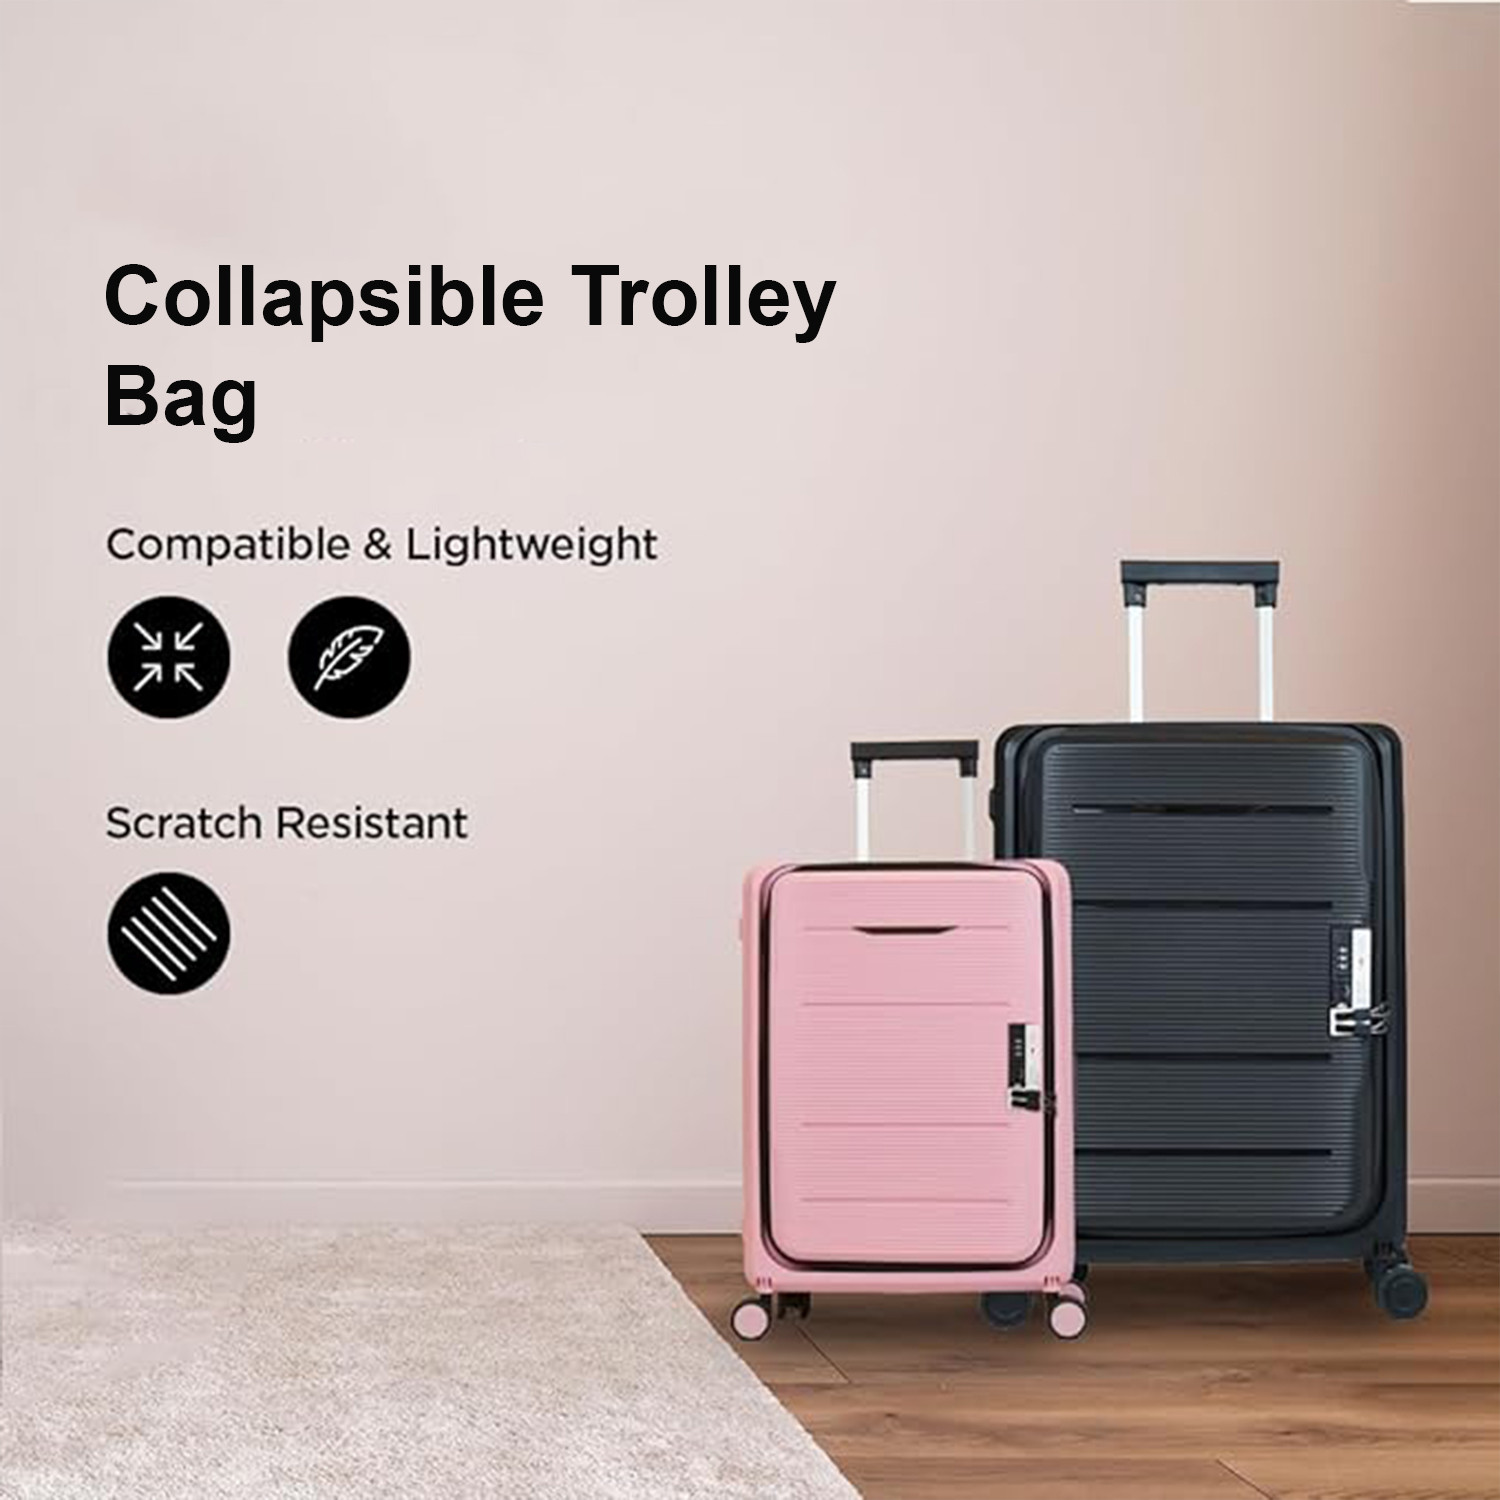 Kuber Industries Luggage Bag | Trolley Bags for Travel | Collapsible Luggage Bag | Travelling Bag | Trolley Bags for Suitcase | Lightweight Luggage Bag | 20C-24C Inch | Coffee